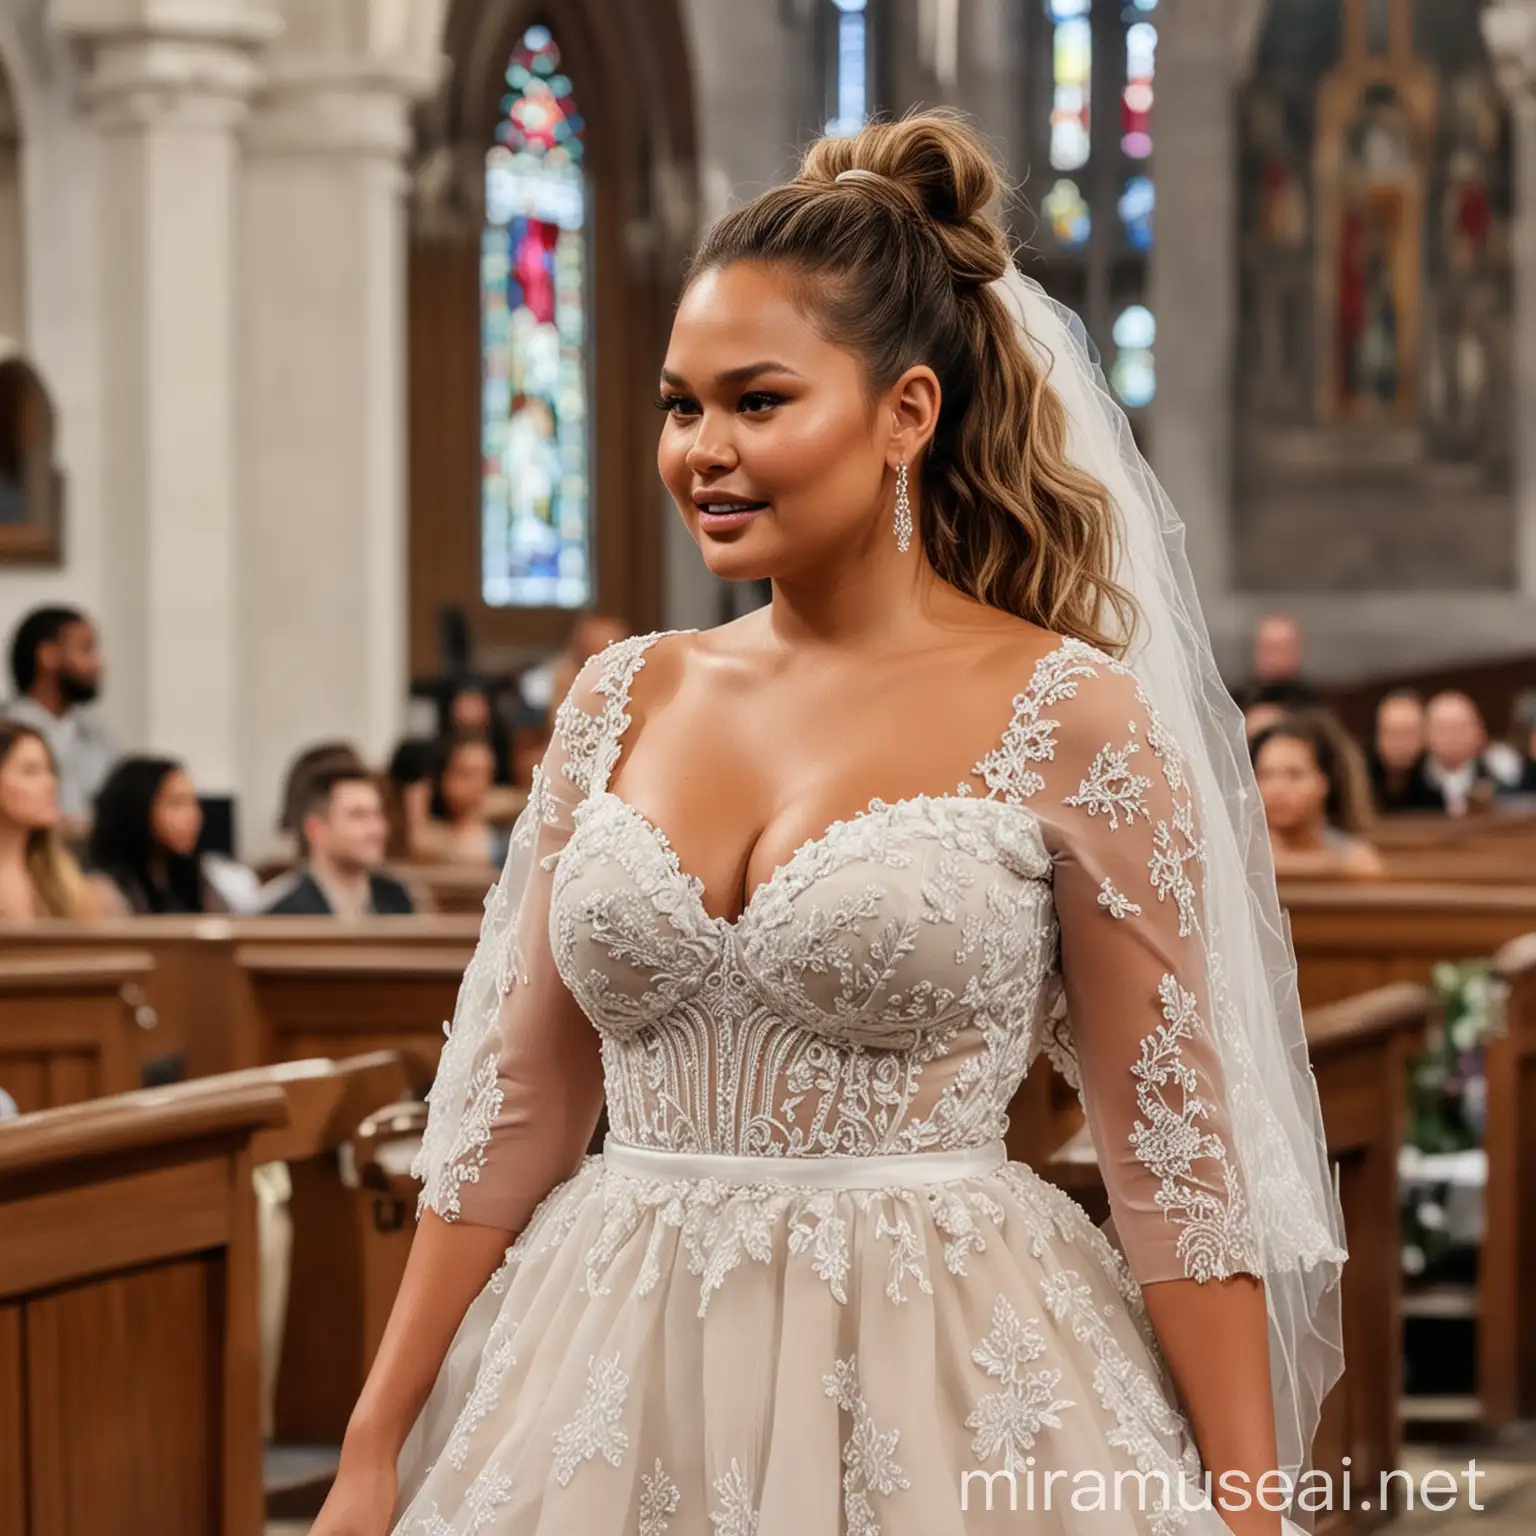 Chrissy Teigen wearing a short wedding dress in church, bbw, big long kinky hair in a ponytail, showing massive, zoomed in from the waist up 